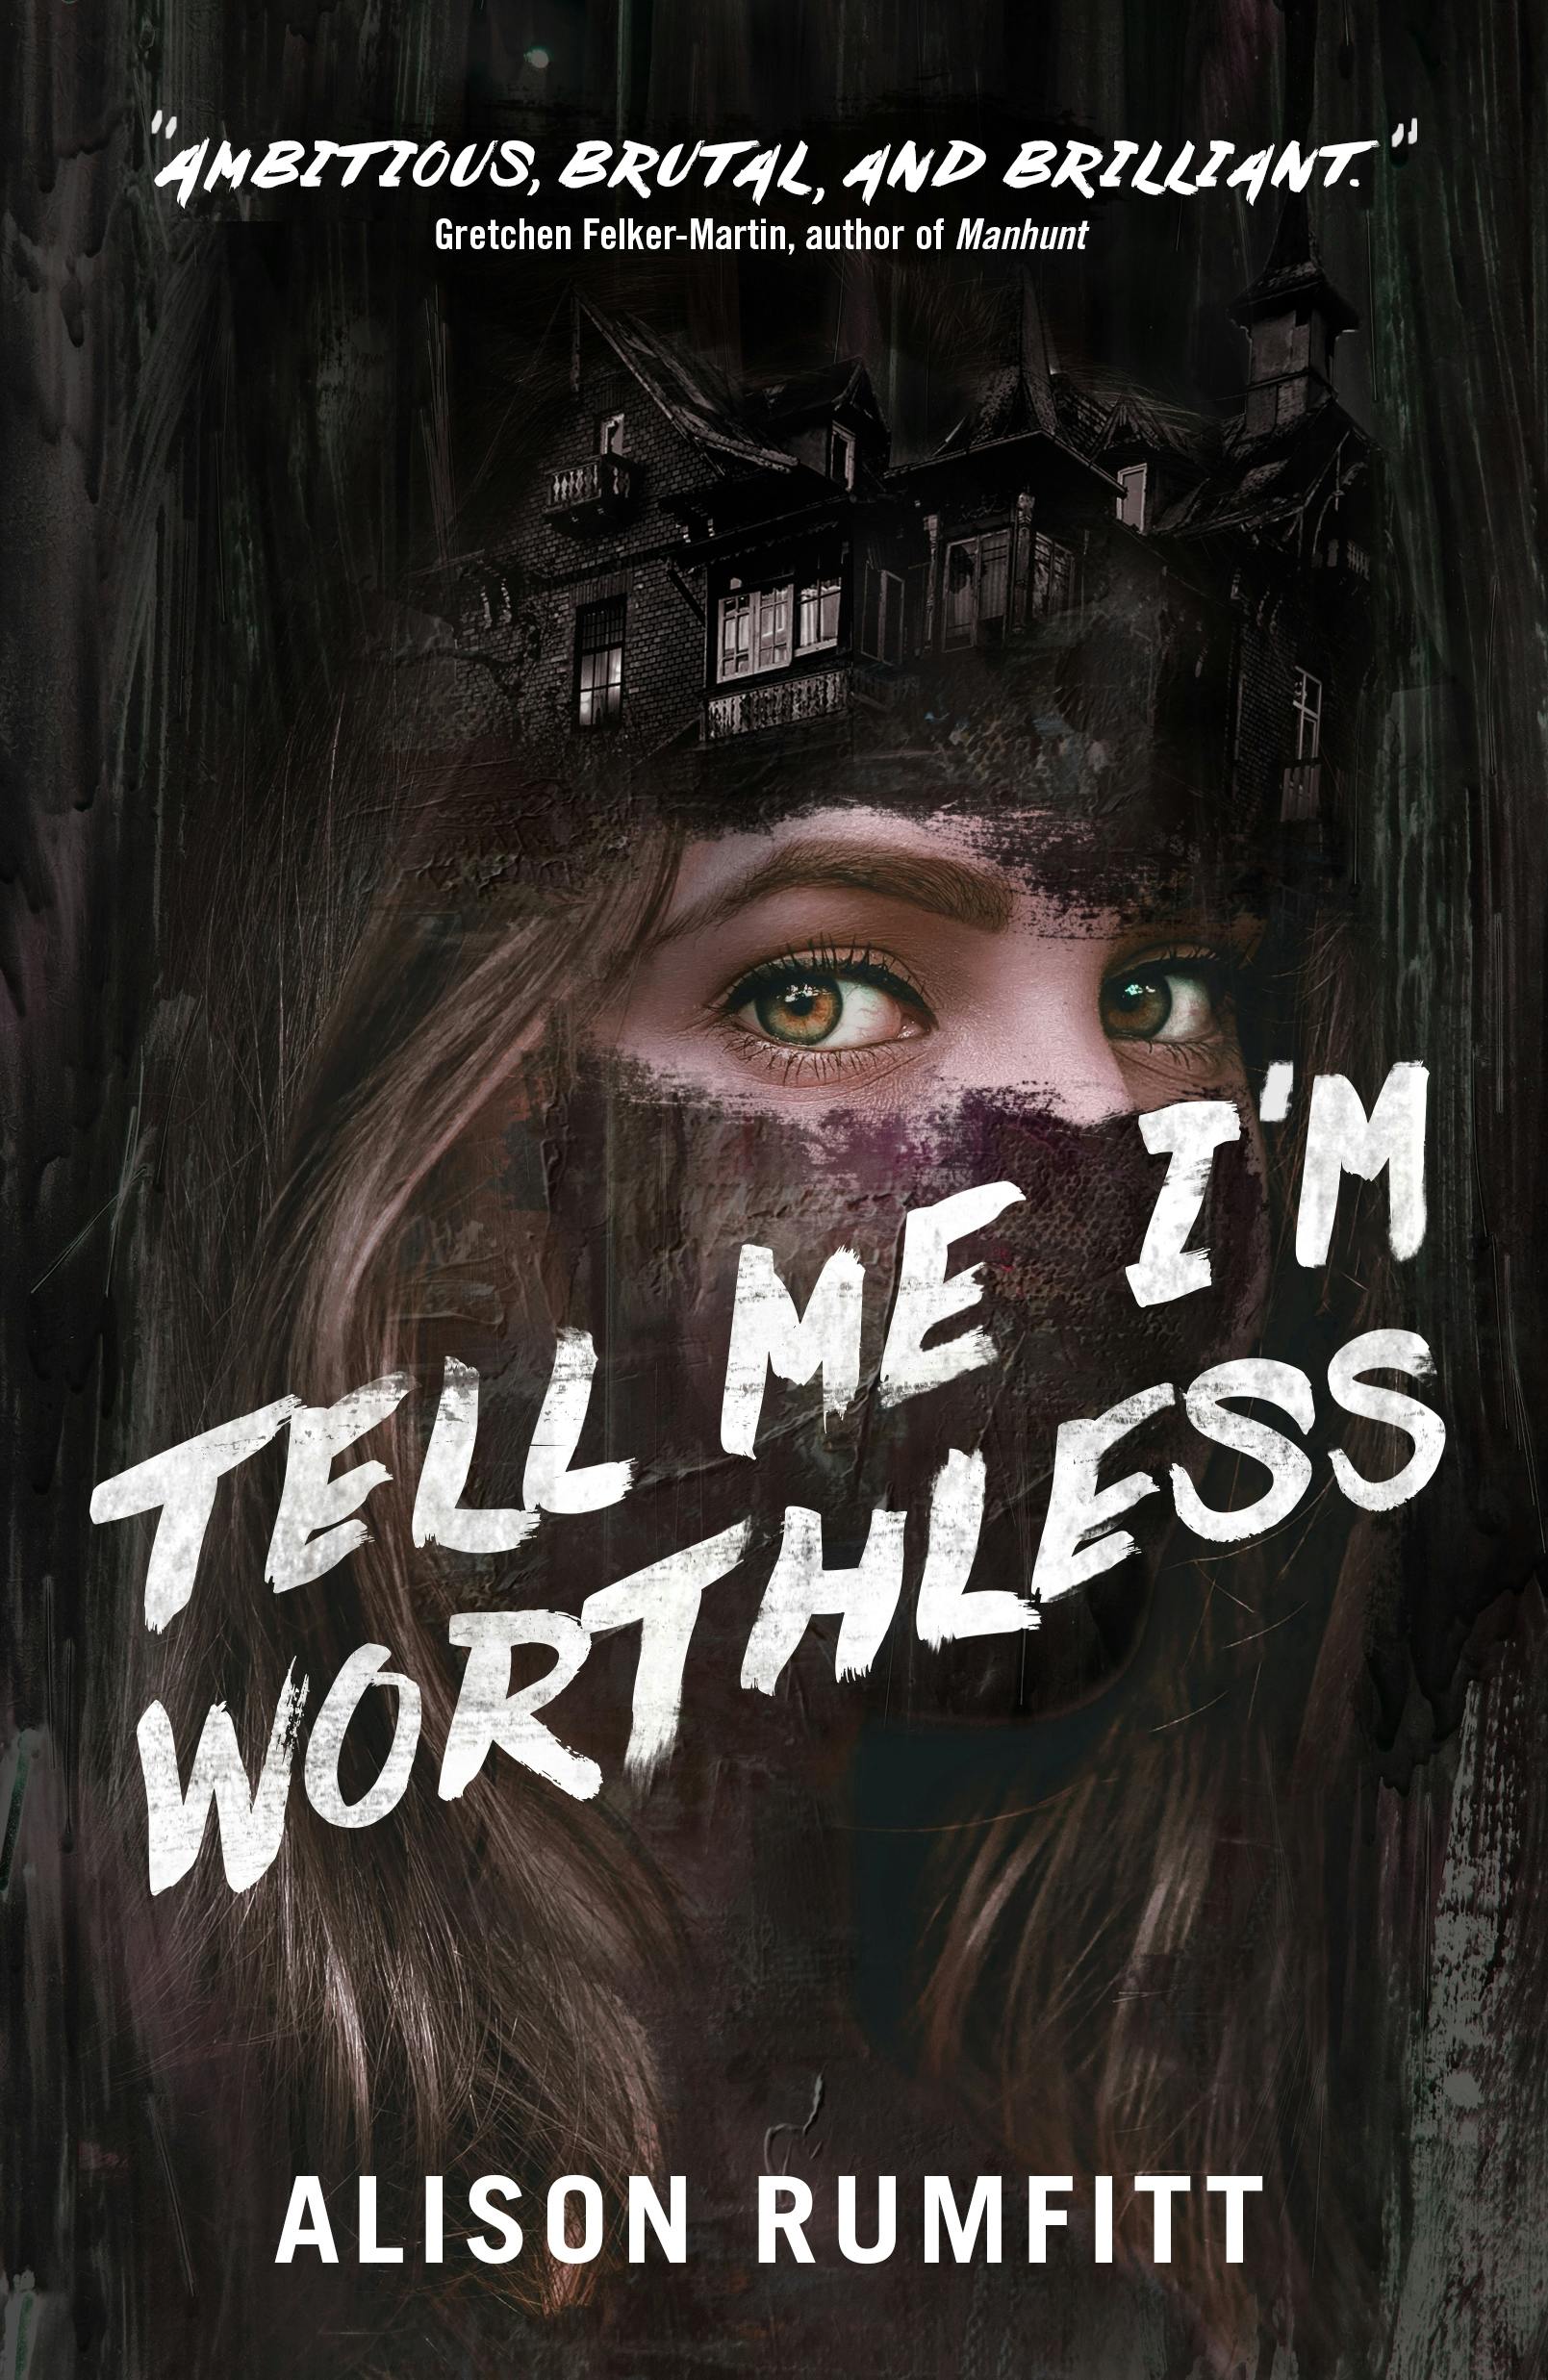 Cover for the book titled as: Tell Me I'm Worthless